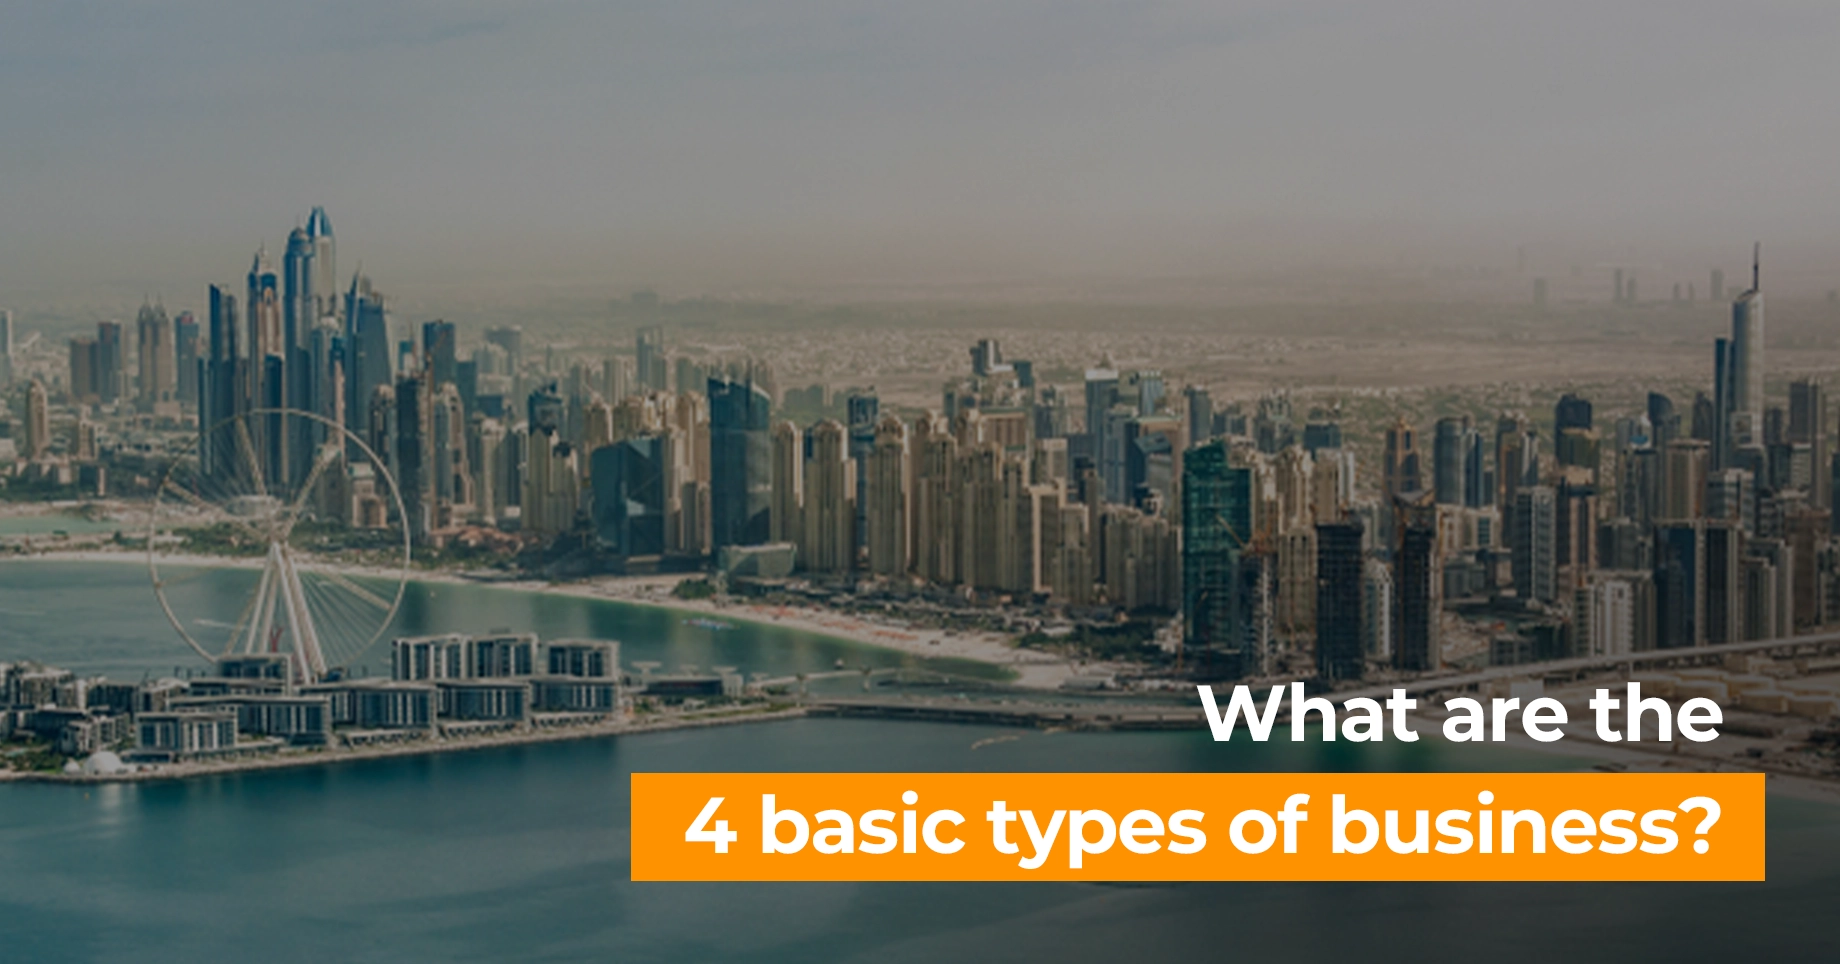 What are the basic types of business